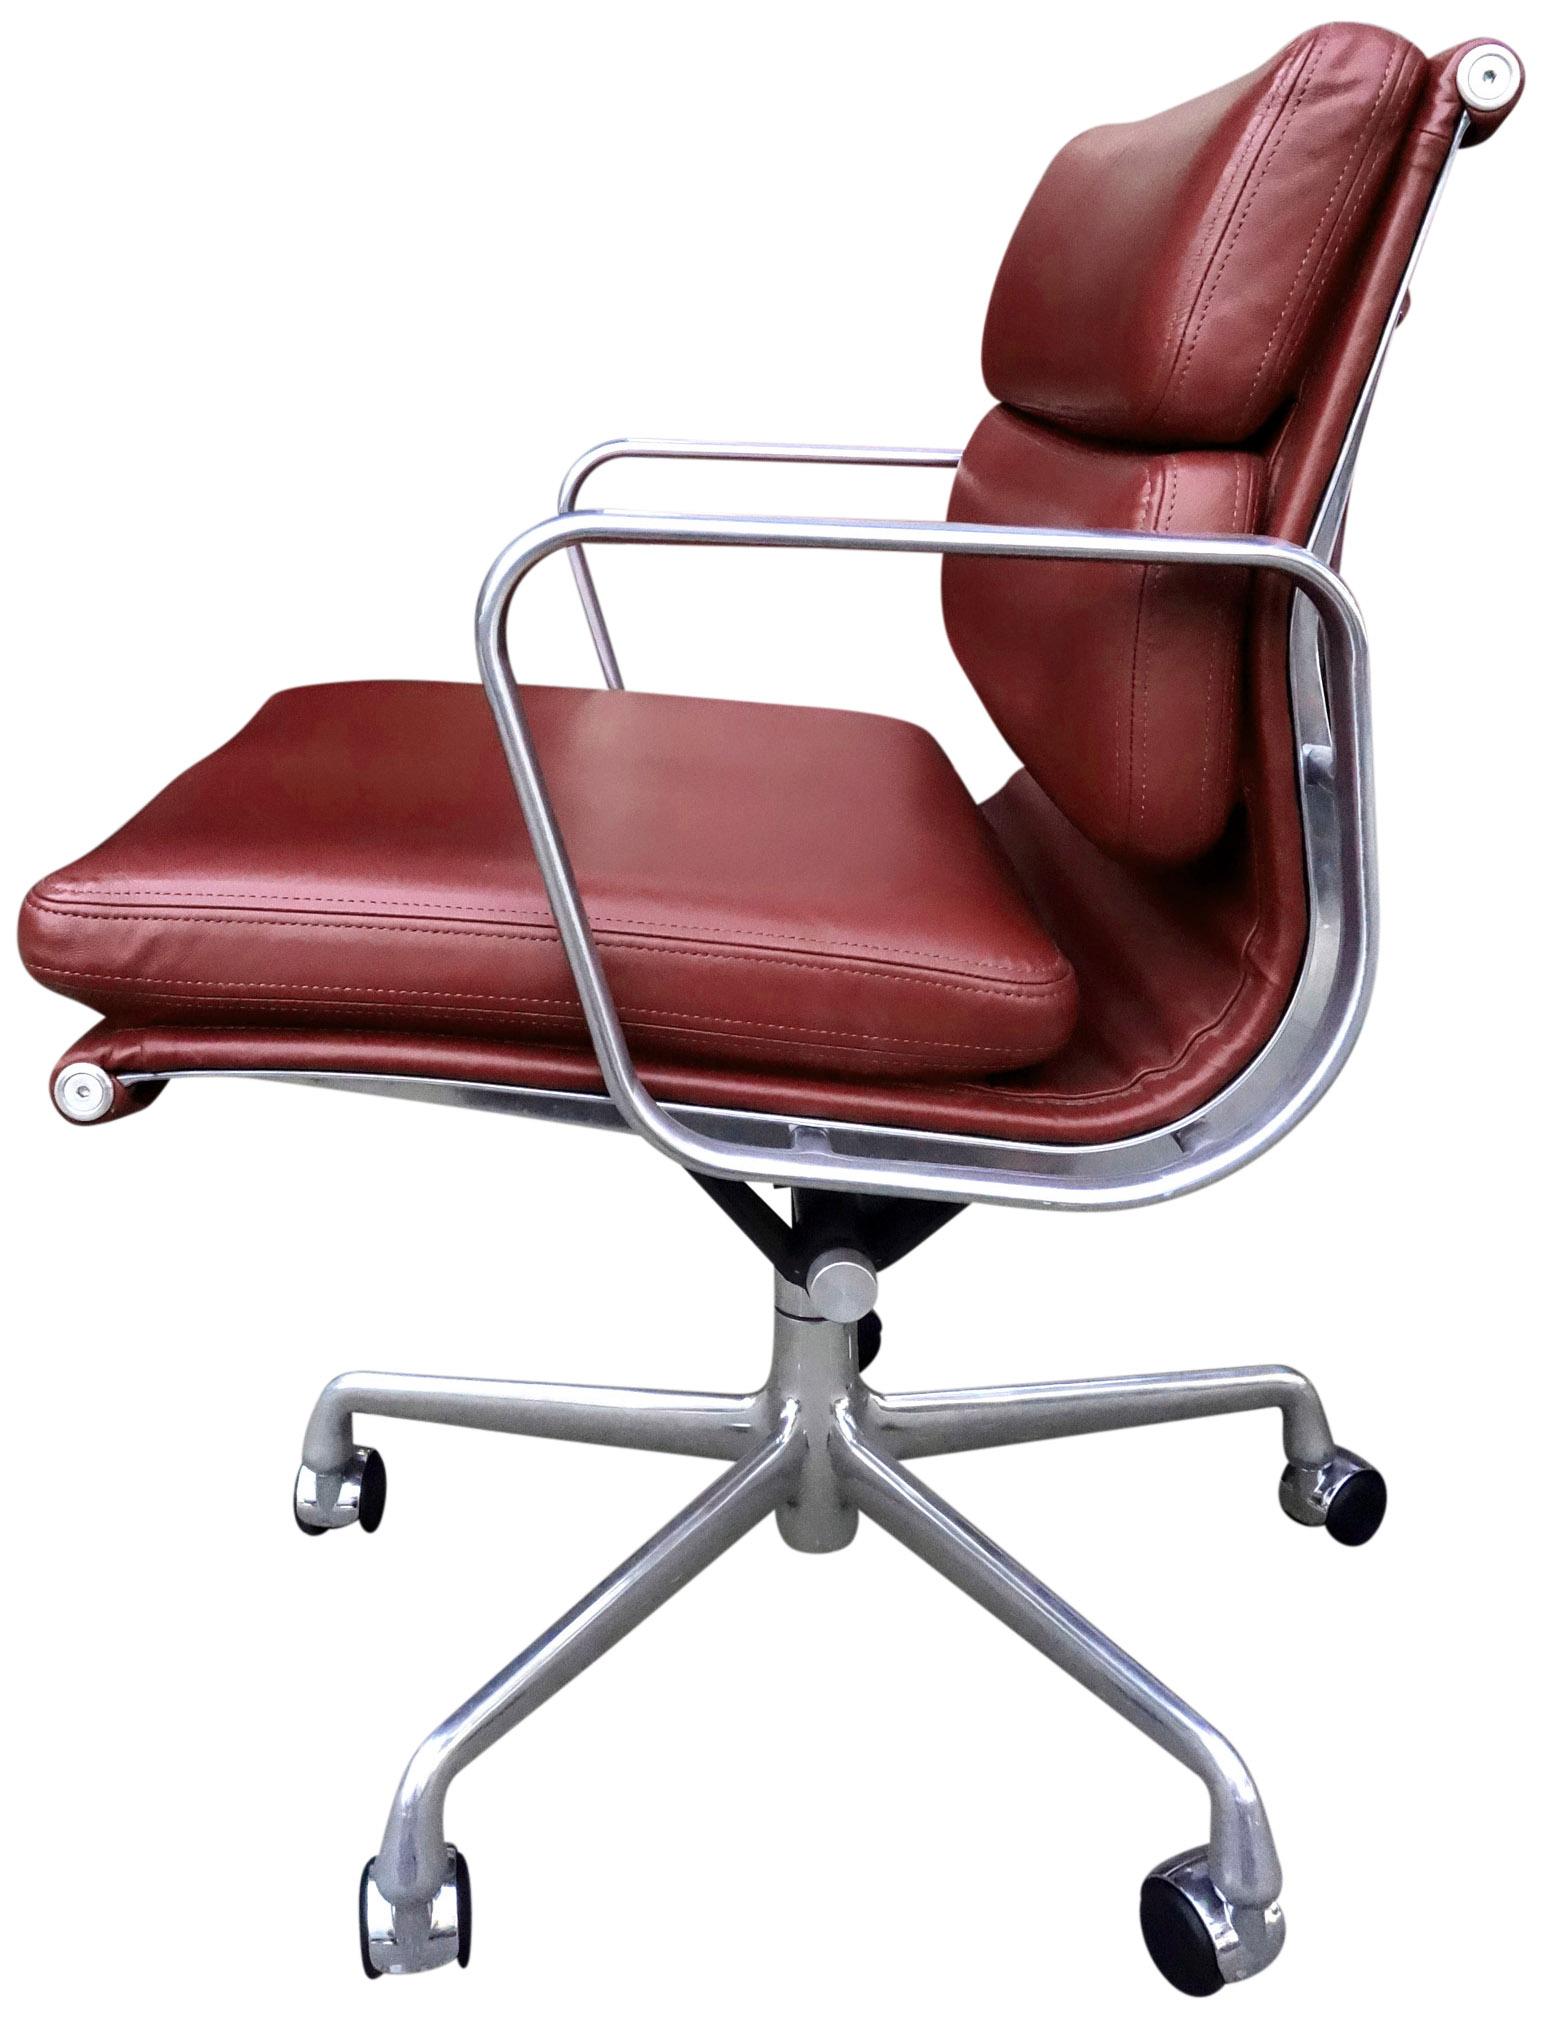 For your consideration are these authentic Eames for Herman Miller vintage soft pad chairs on 5 star base in ox blood red, burgundy leather. Adjustable tilt and height with manual lift. This authentic vintage example are icons of Mid-Century Modern